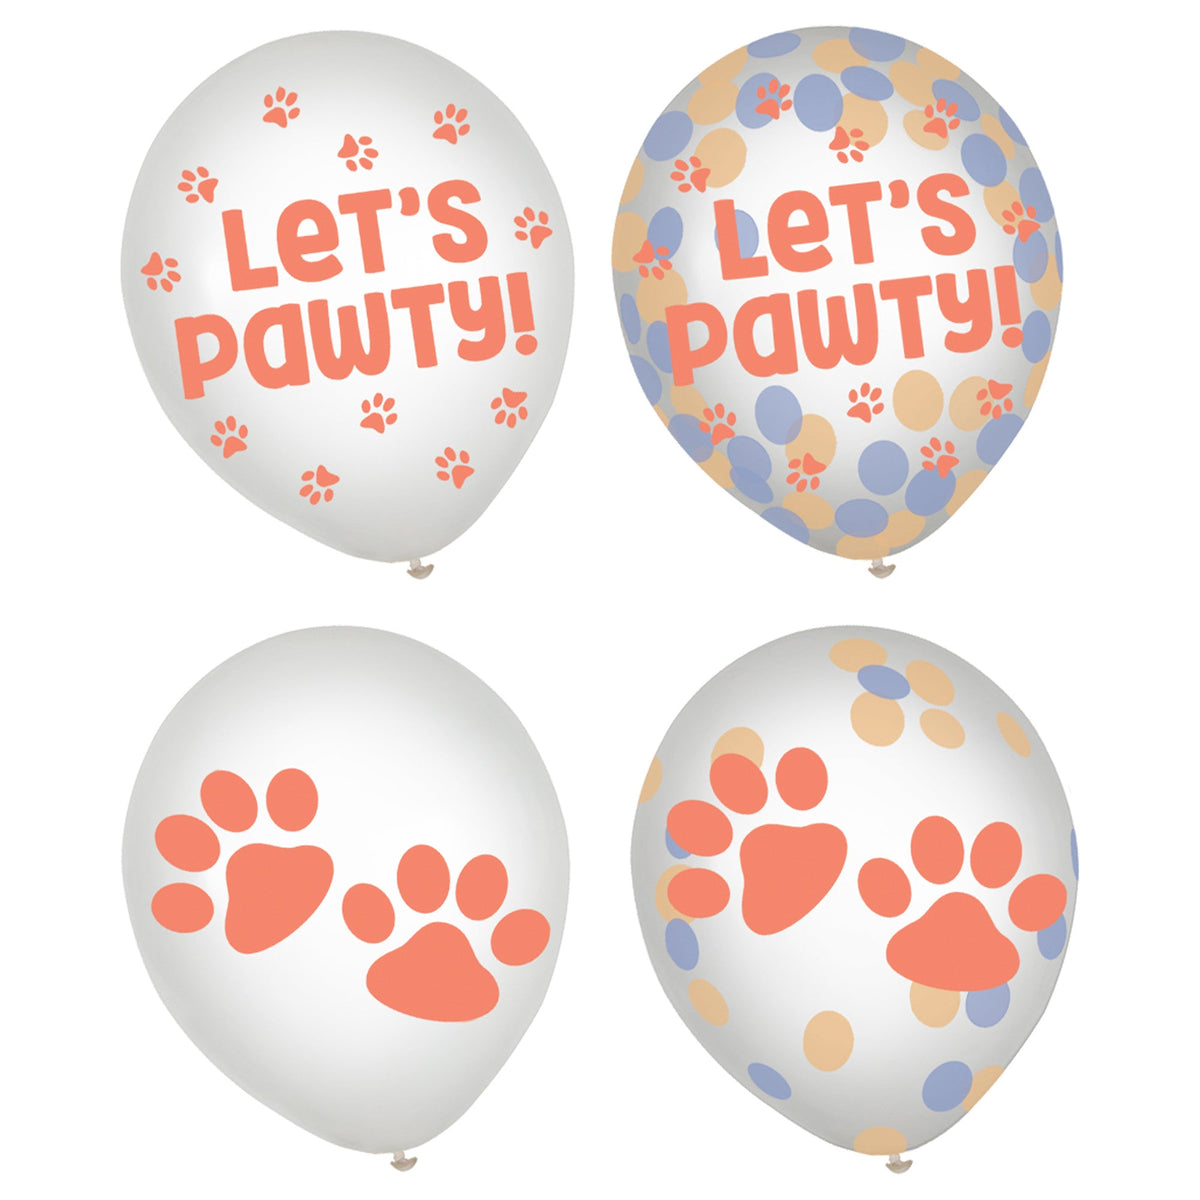 AMSCAN CA Kids Birthday Pawsome Party Confetti Latex Balloons, Clear, Orange, and Blue, 12 Inches, 6 Count 192937432341